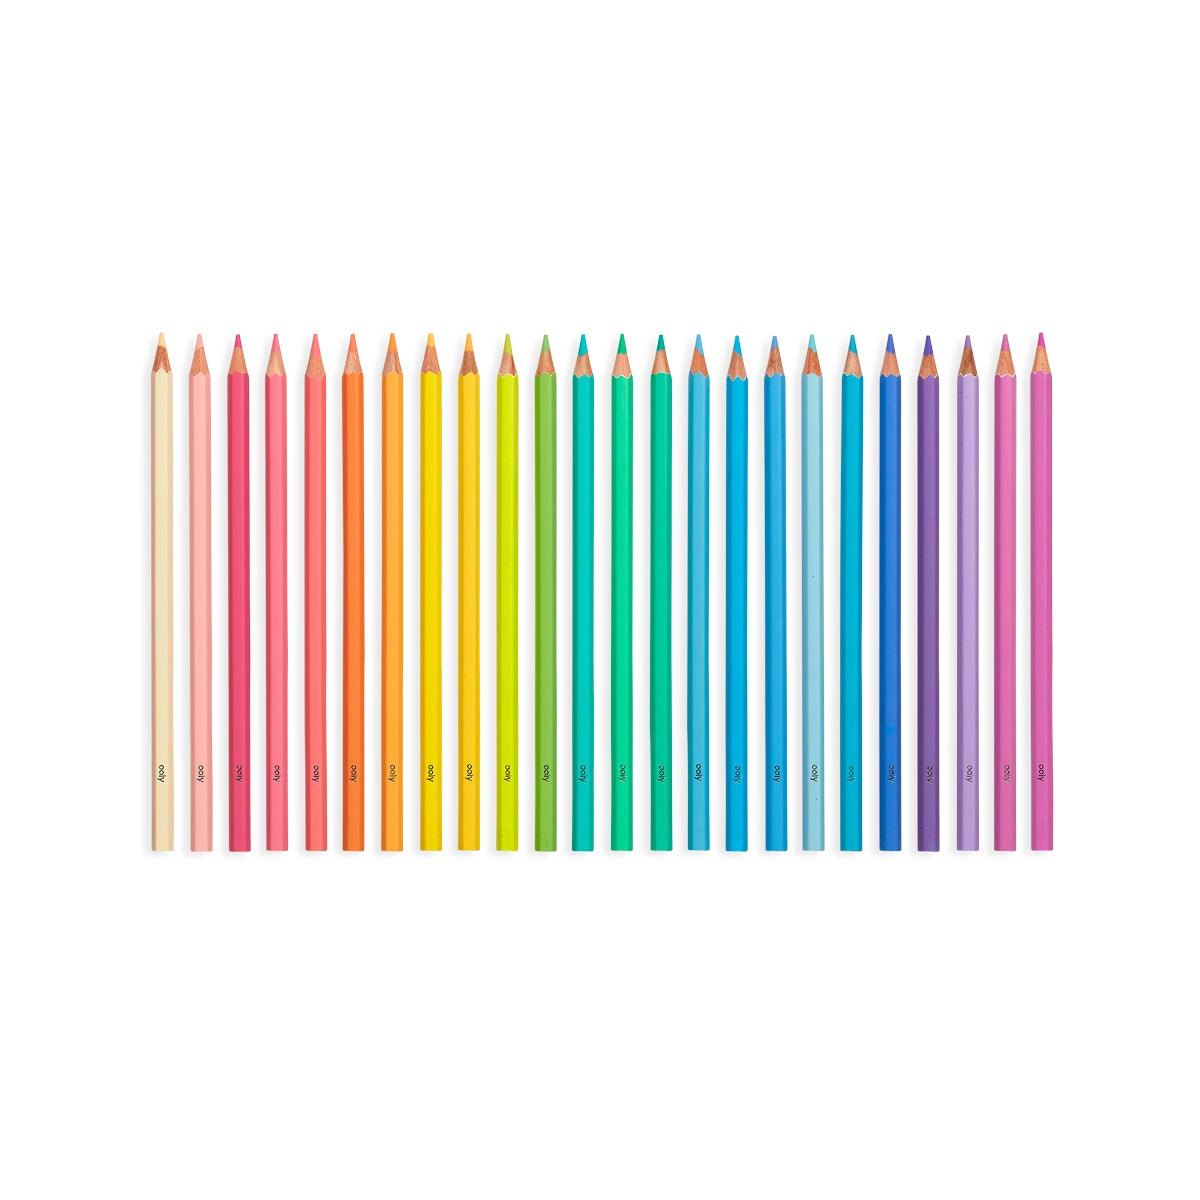 Ooly Pastel Hues Colored Pencils | Prelude & Dawn | Los Angeles